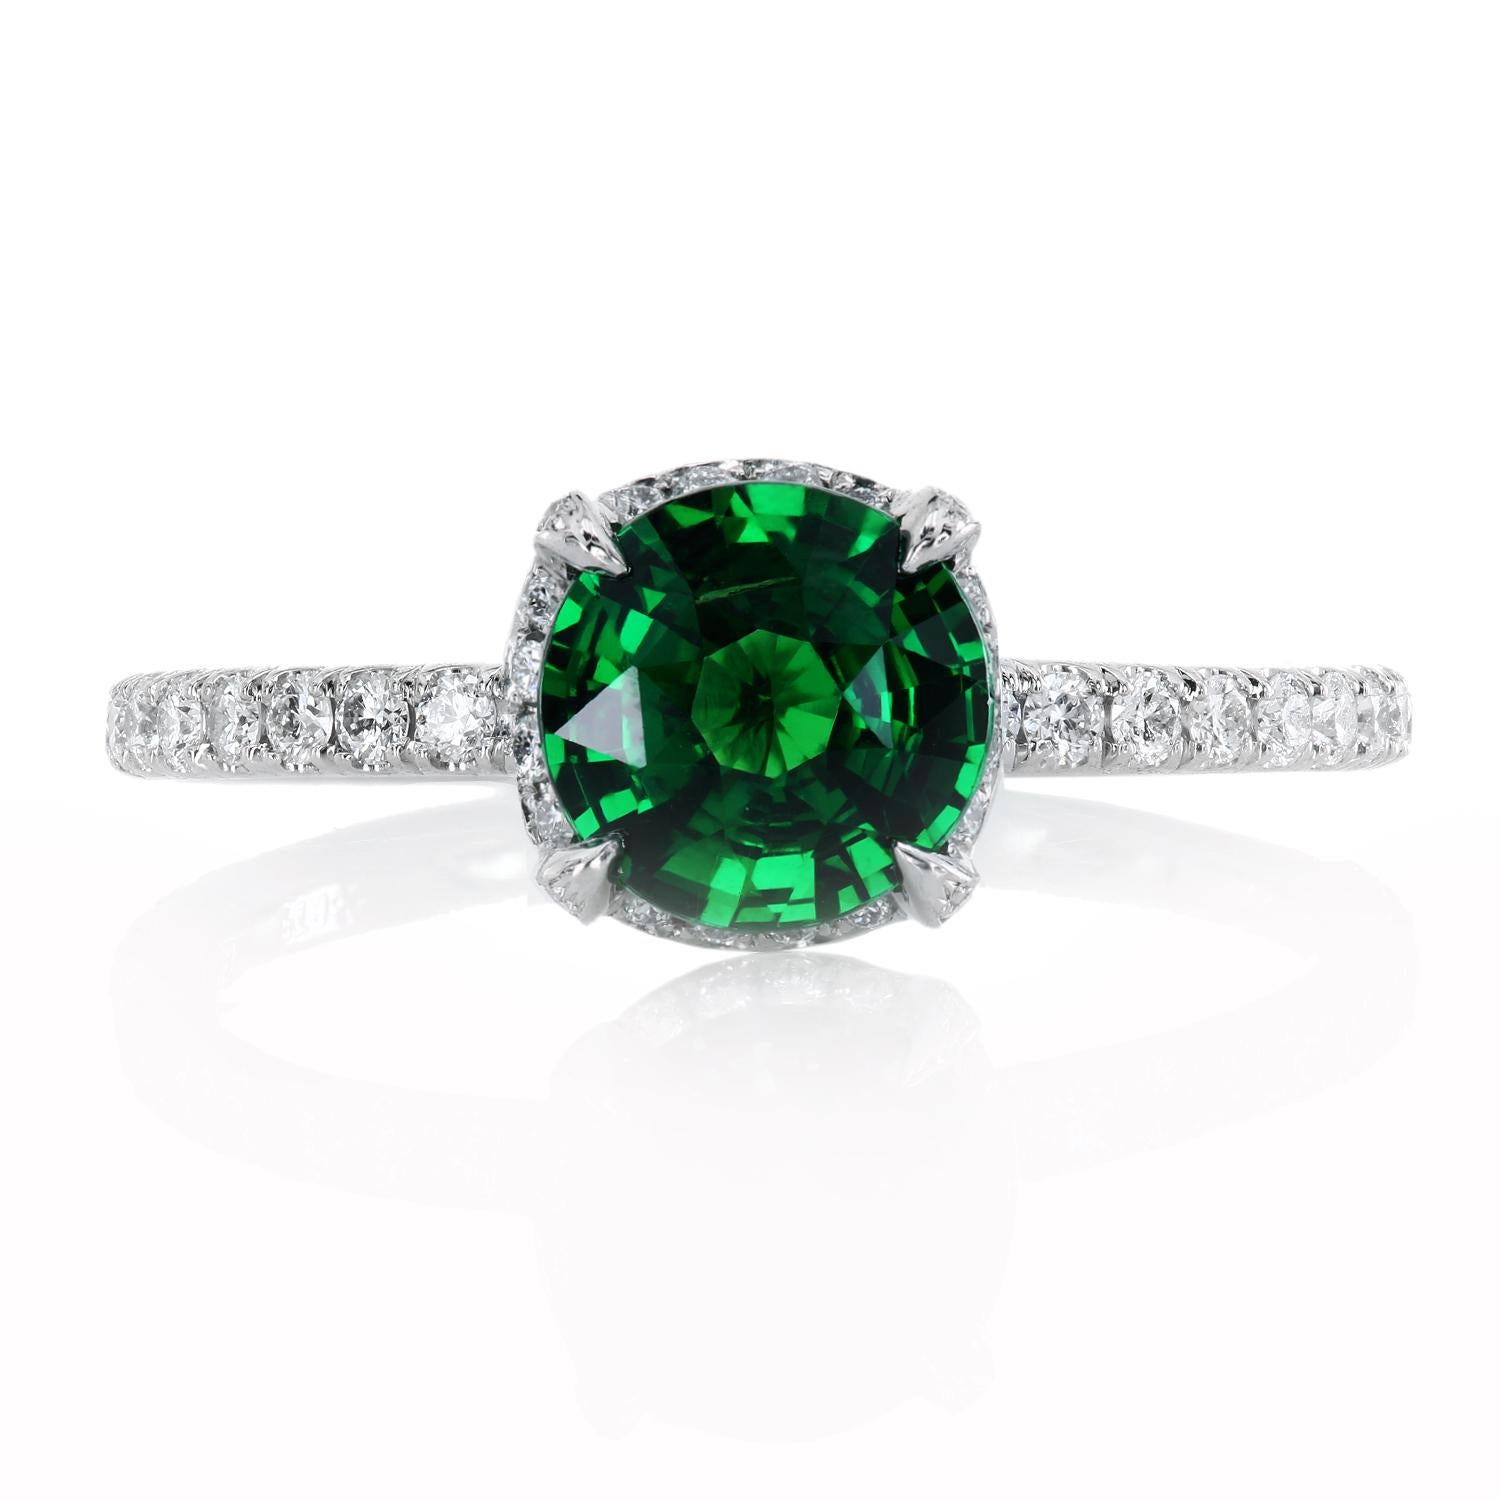 The vivid-green 1.06-carat tsavorite has been cut into a masterfully balanced gem and has excellent clarity with only minor inclusions typical for such material. The gemstone is set in a custom-designed micro-pave platinum ring with 84 ideal cut